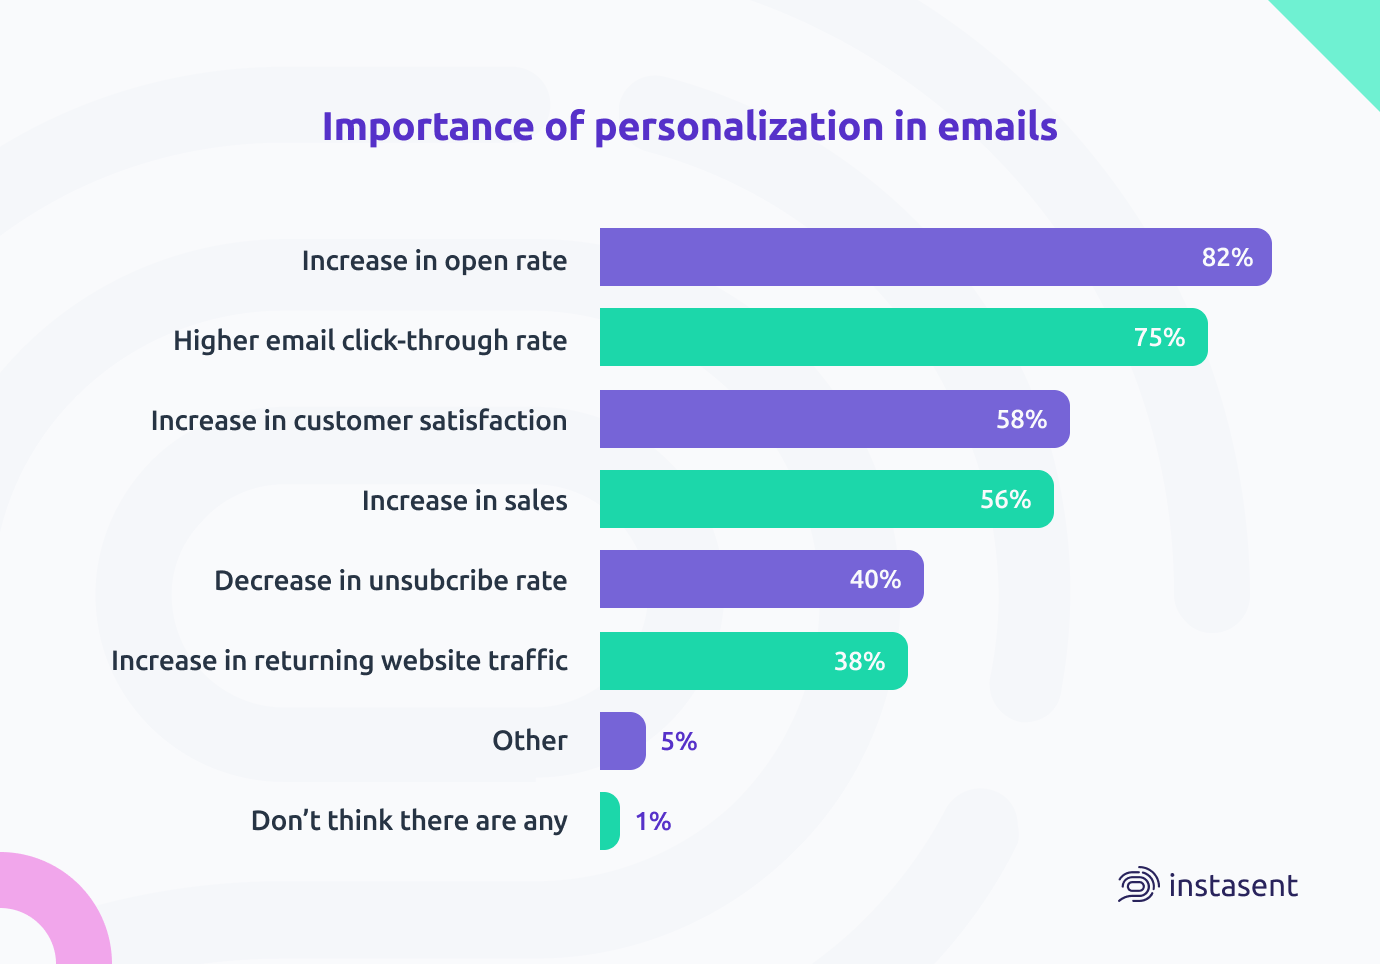 Personalization's impact in customers and rates